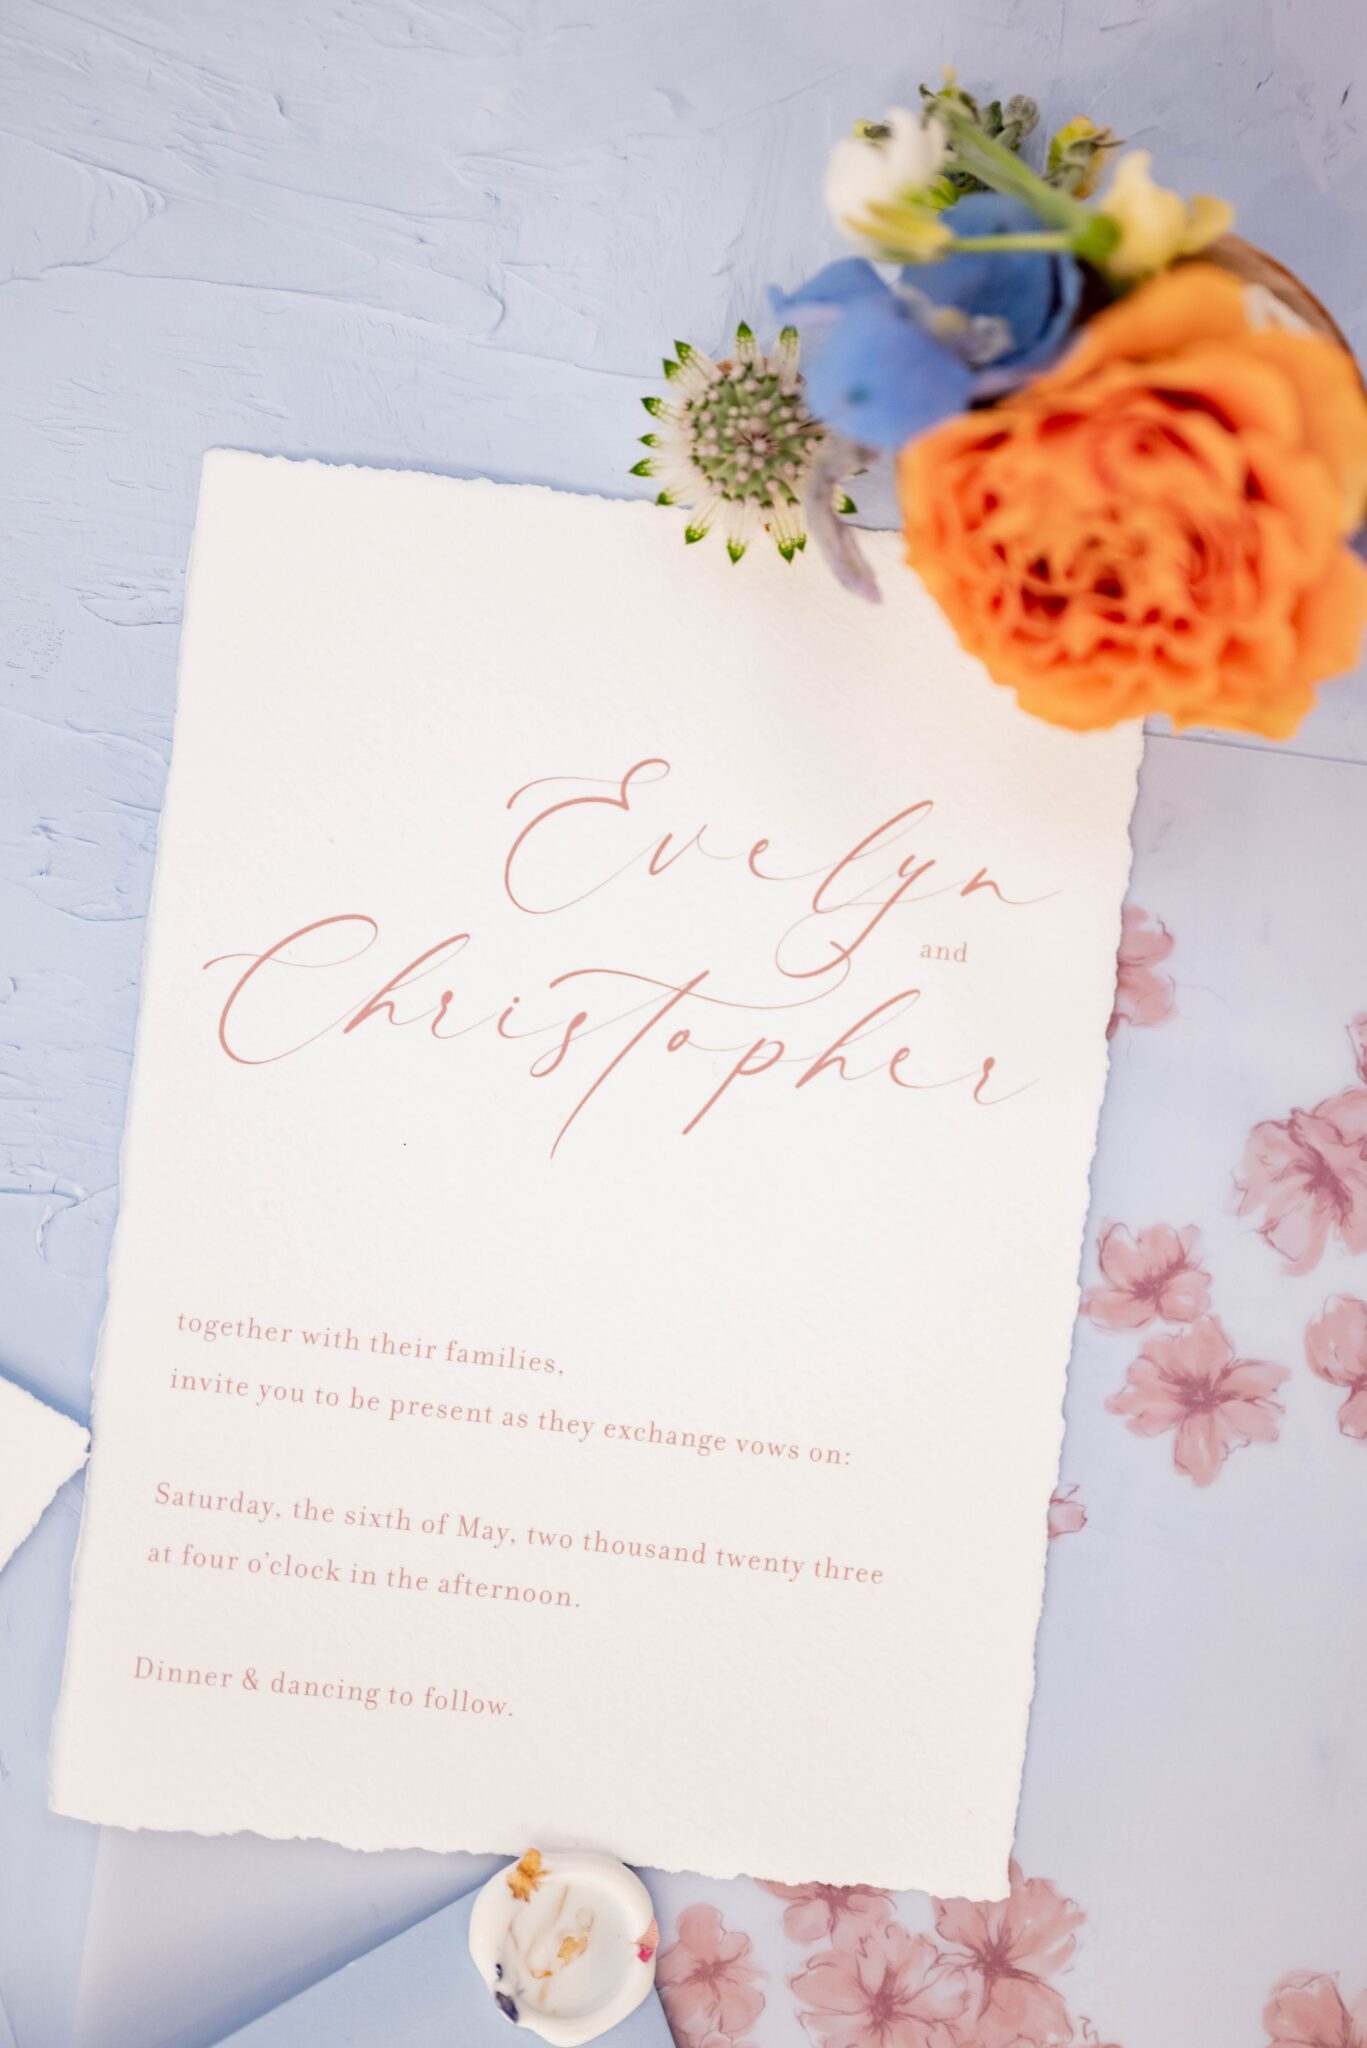 wedding invitation stationery flat lay on baby blue background, wedding details photo inspiration featuring spring wild flowers in blue, orange and green